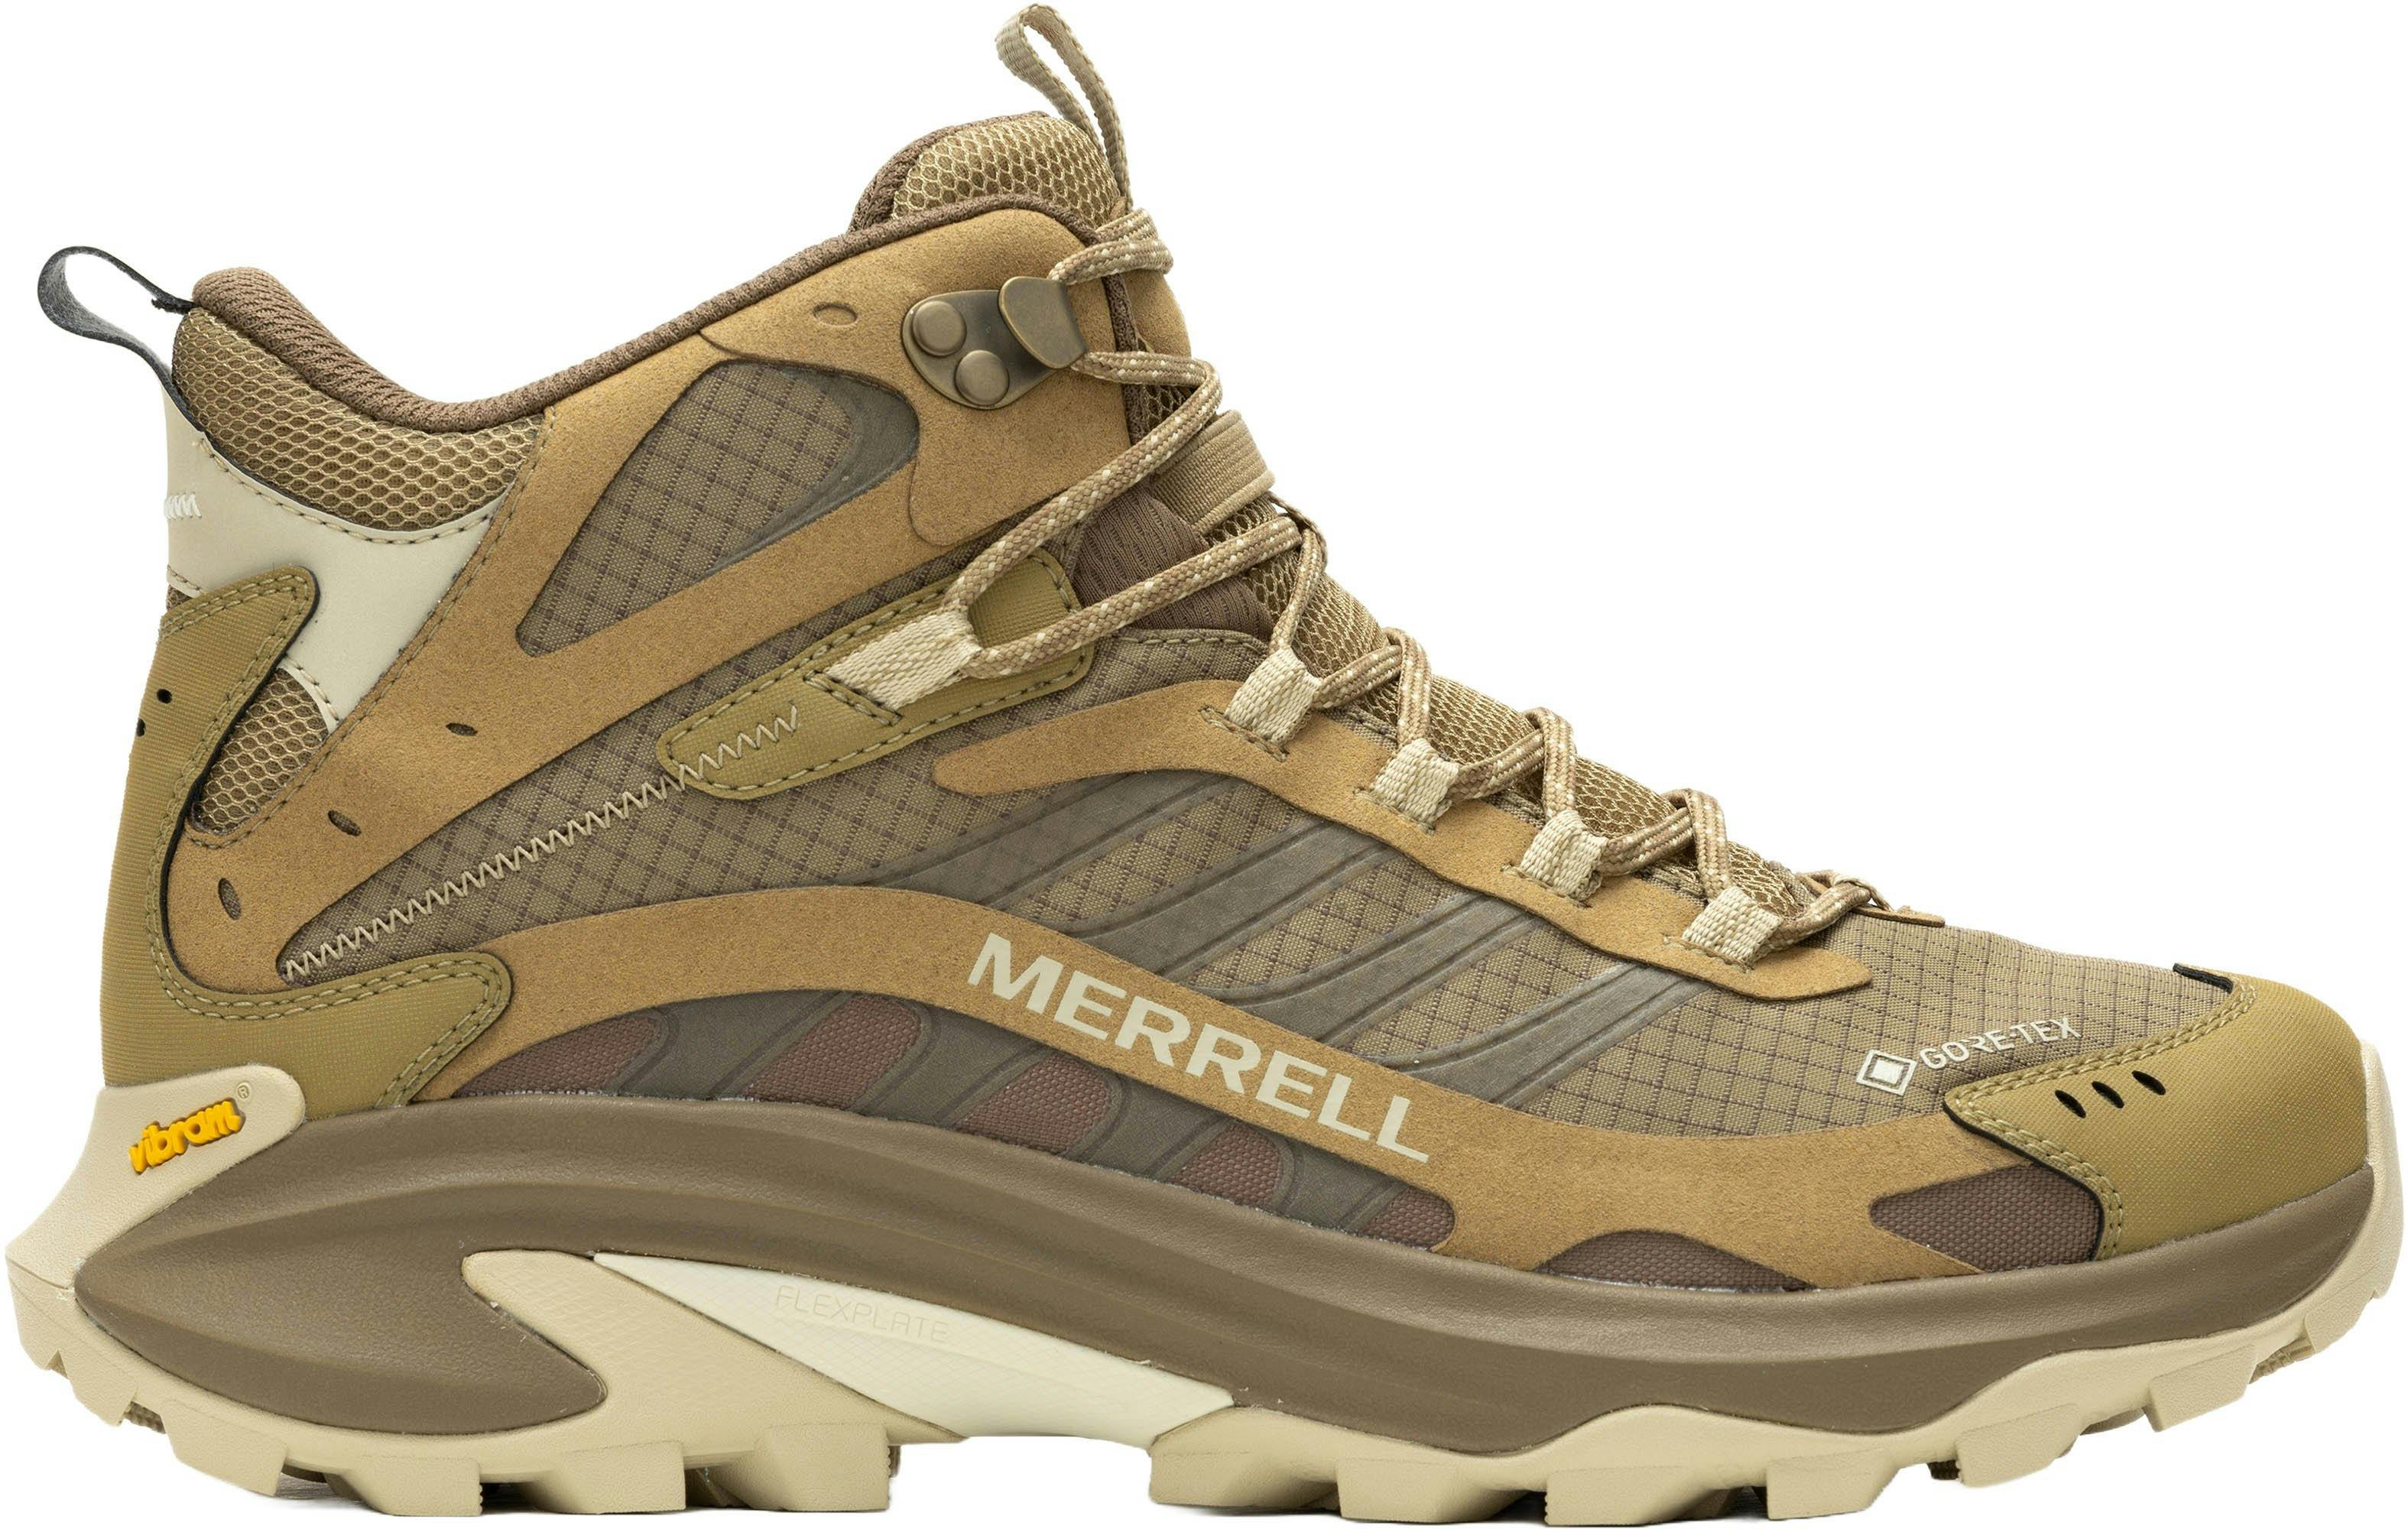 Product image for Moab Speed 2 Mid Gore-Tex Hiking Boots - Men's